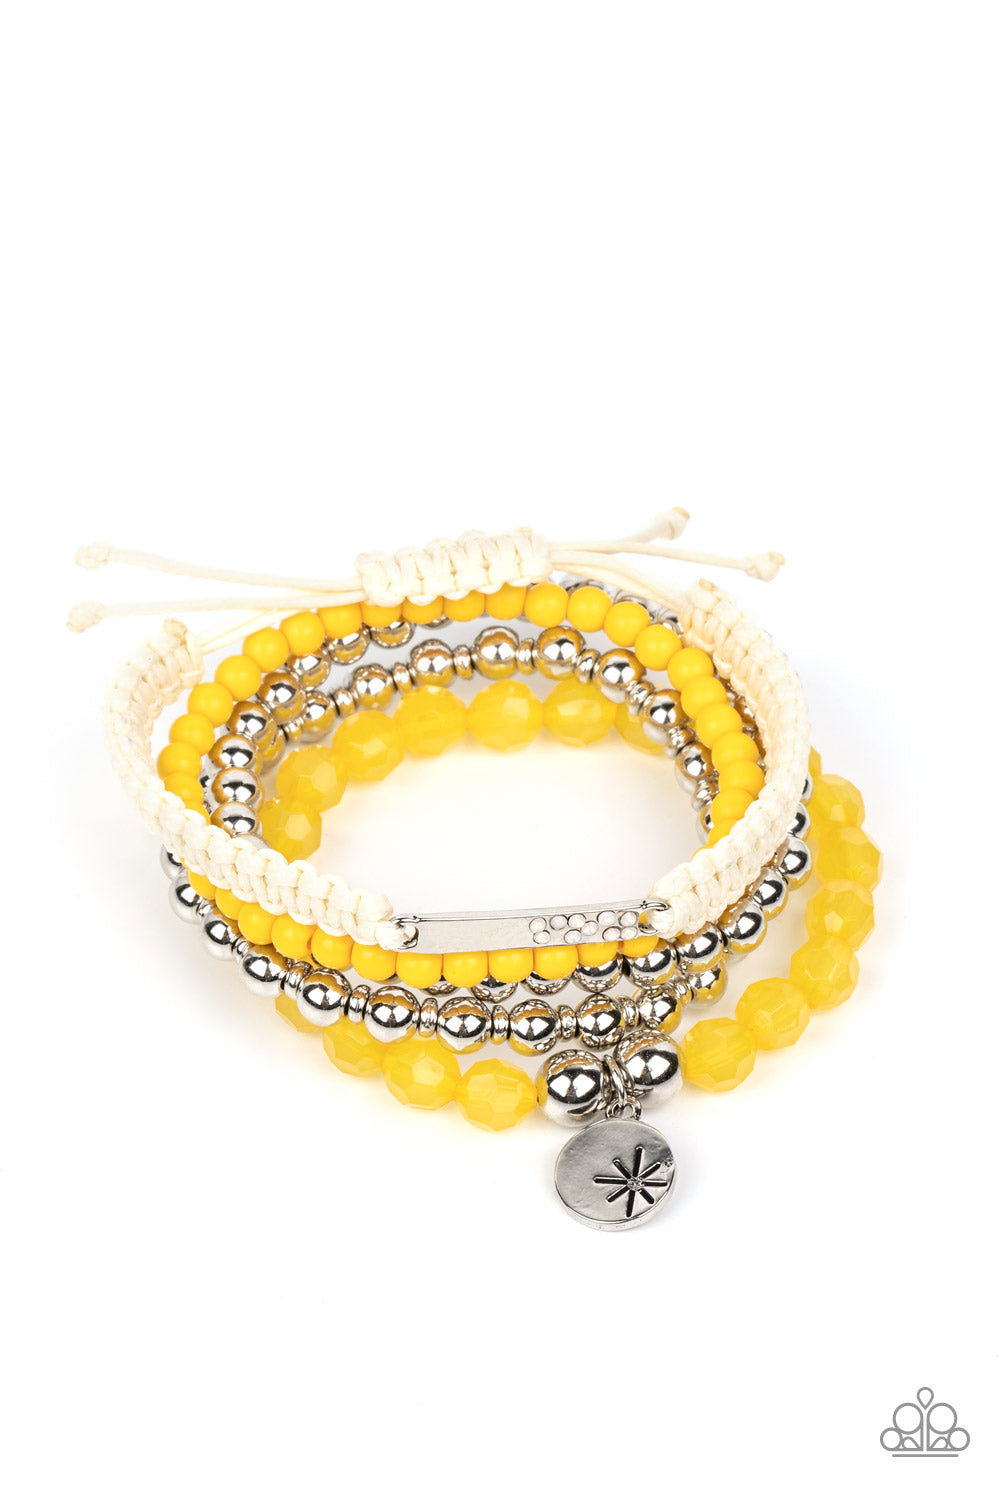 Strands of yellow beads in the vibrant Pantone® of Samoan Sun are threaded along stretchy elastic bands to create a stack of bracelets. The varying opacities of each yellow bead adds depth to the design, as a strand of silver beads adds metallic sheen. A silver disc stamped with a star offers a whimsical accent, as a silver bar dotted with opalescent rhinestones is tied to another bracelet created with ivory cording and a sliding knot closure.  Sold as one set of five bracelets.